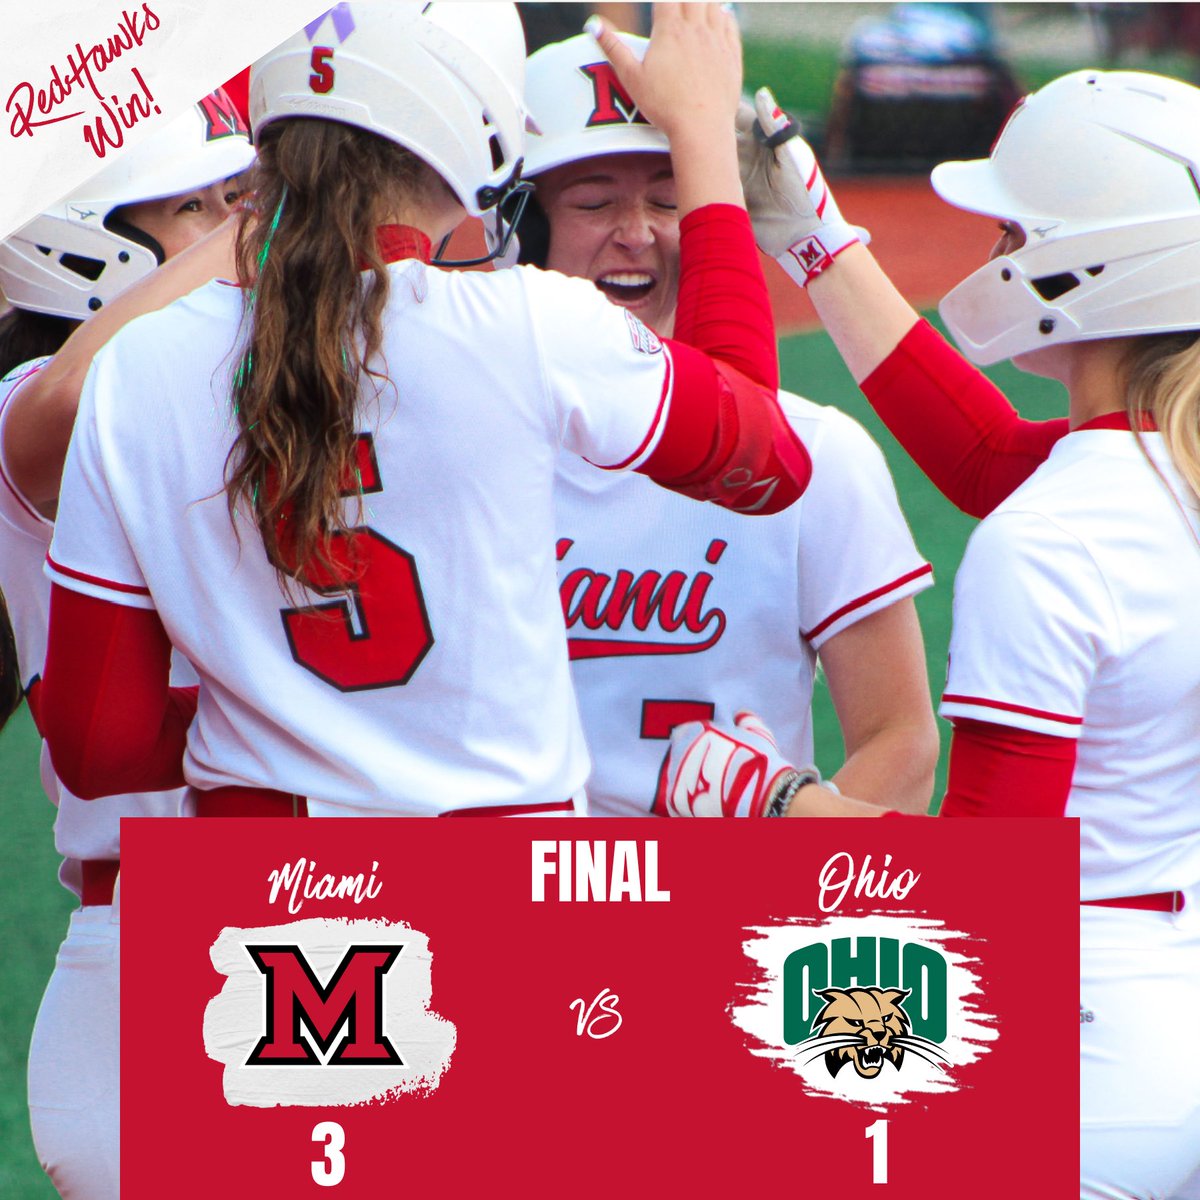 The RedHawks win, moving them on to the Championship Game!#RiseUpRedHawks 🔴Reeves got the win in the circle allowing just 3 hits & 0 earned runs 🔴Spaid had a Superman-looking diving catch at 3rd in the top of the 4th 🔴Bewick went 2-for-2 at the plate